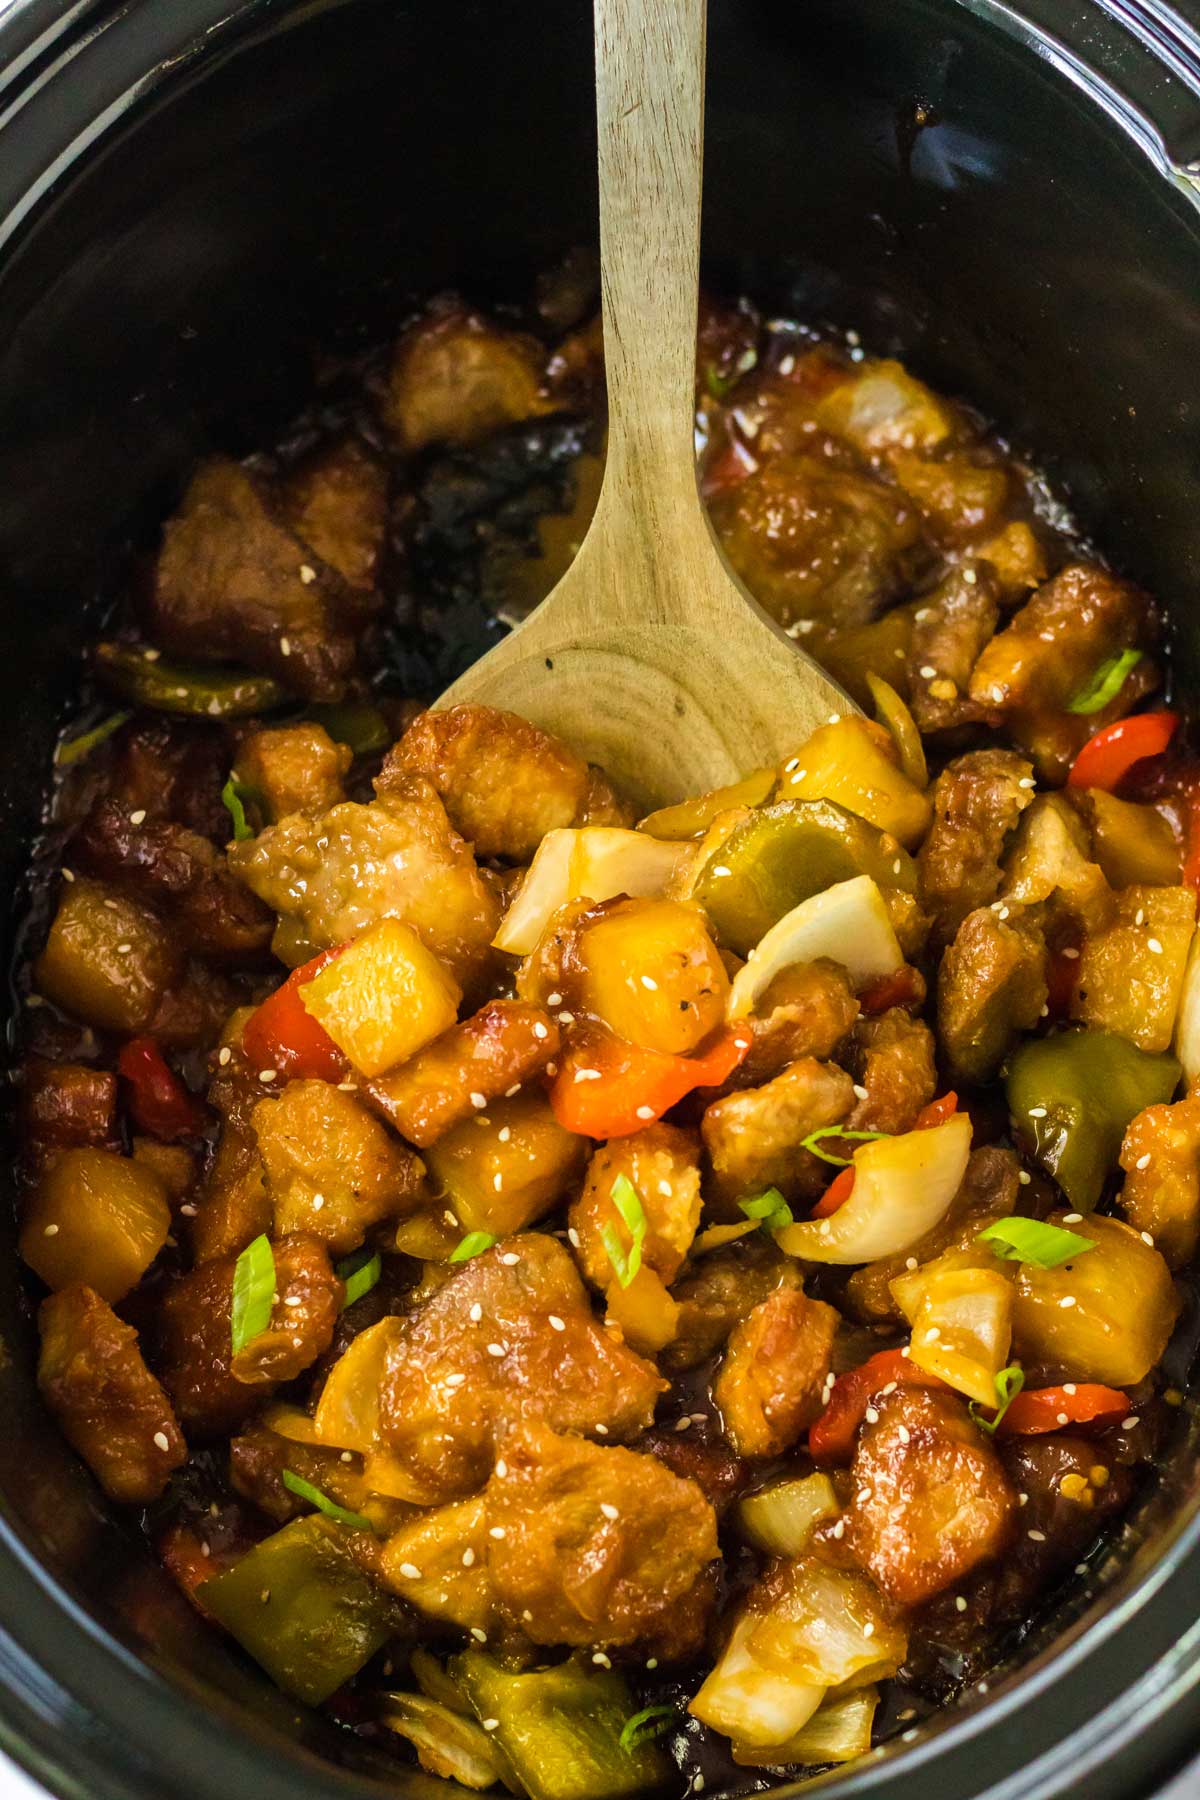 A serving of Slow Cooker Sweet and Sour Pork